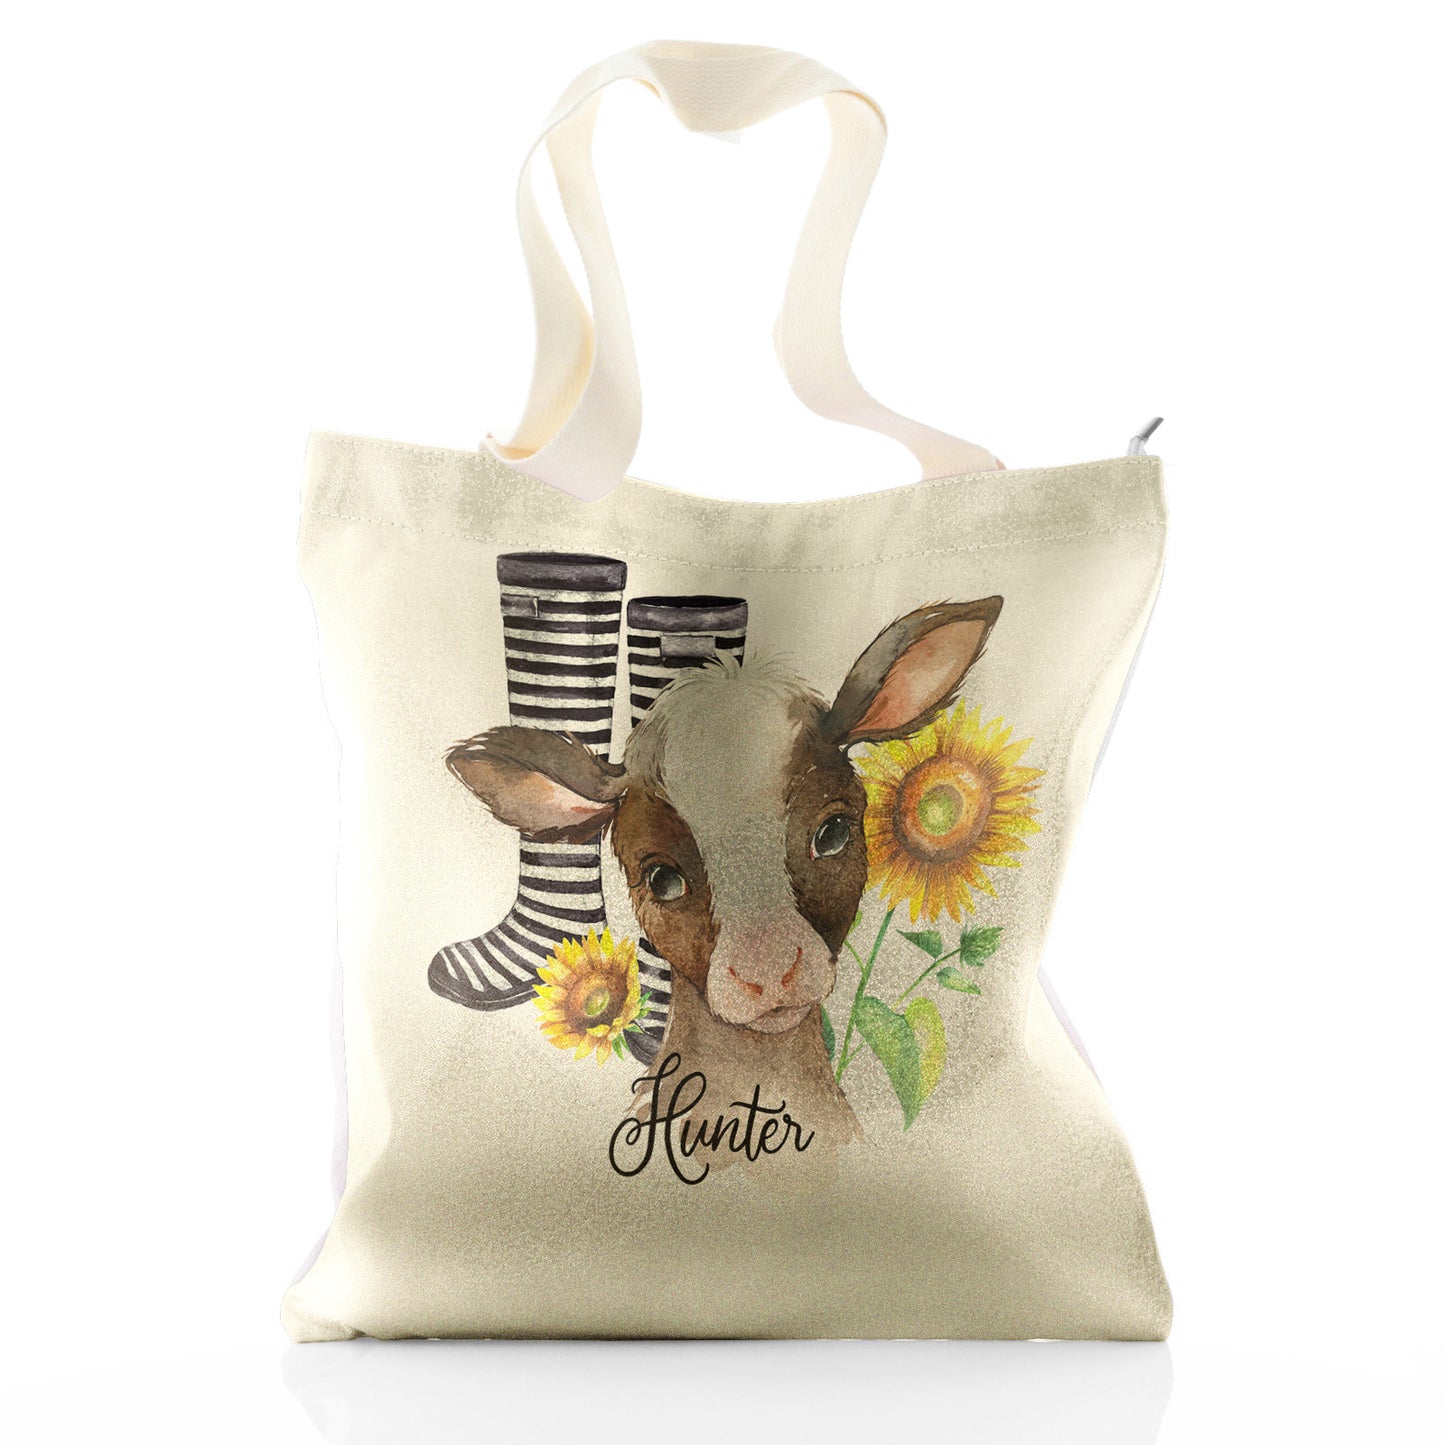 Personalised Glitter Tote Bag with Brown Cow Yellow Sunflowers and Cute Text